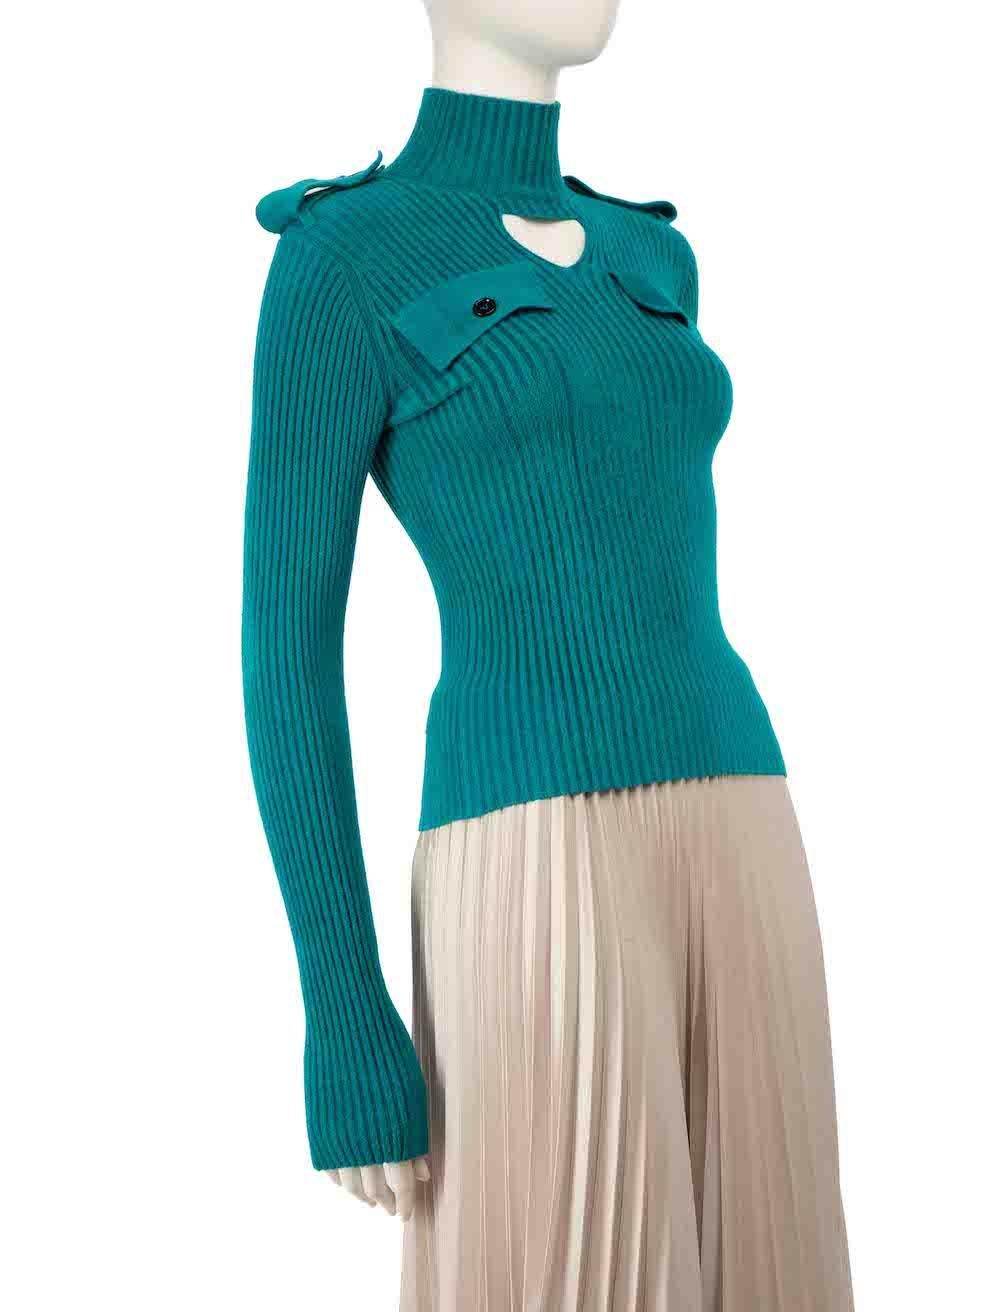 CONDITION is Very good. Hardly any visible wear to jumper is evident on this used Bottega Veneta designer resale item.
 
 
 
 Details
 
 
 Turquoise
 
 Viscose
 
 Long sleeves jumper
 
 Ribbed knitted and stretchy
 
 Uniform style
 
 Velour